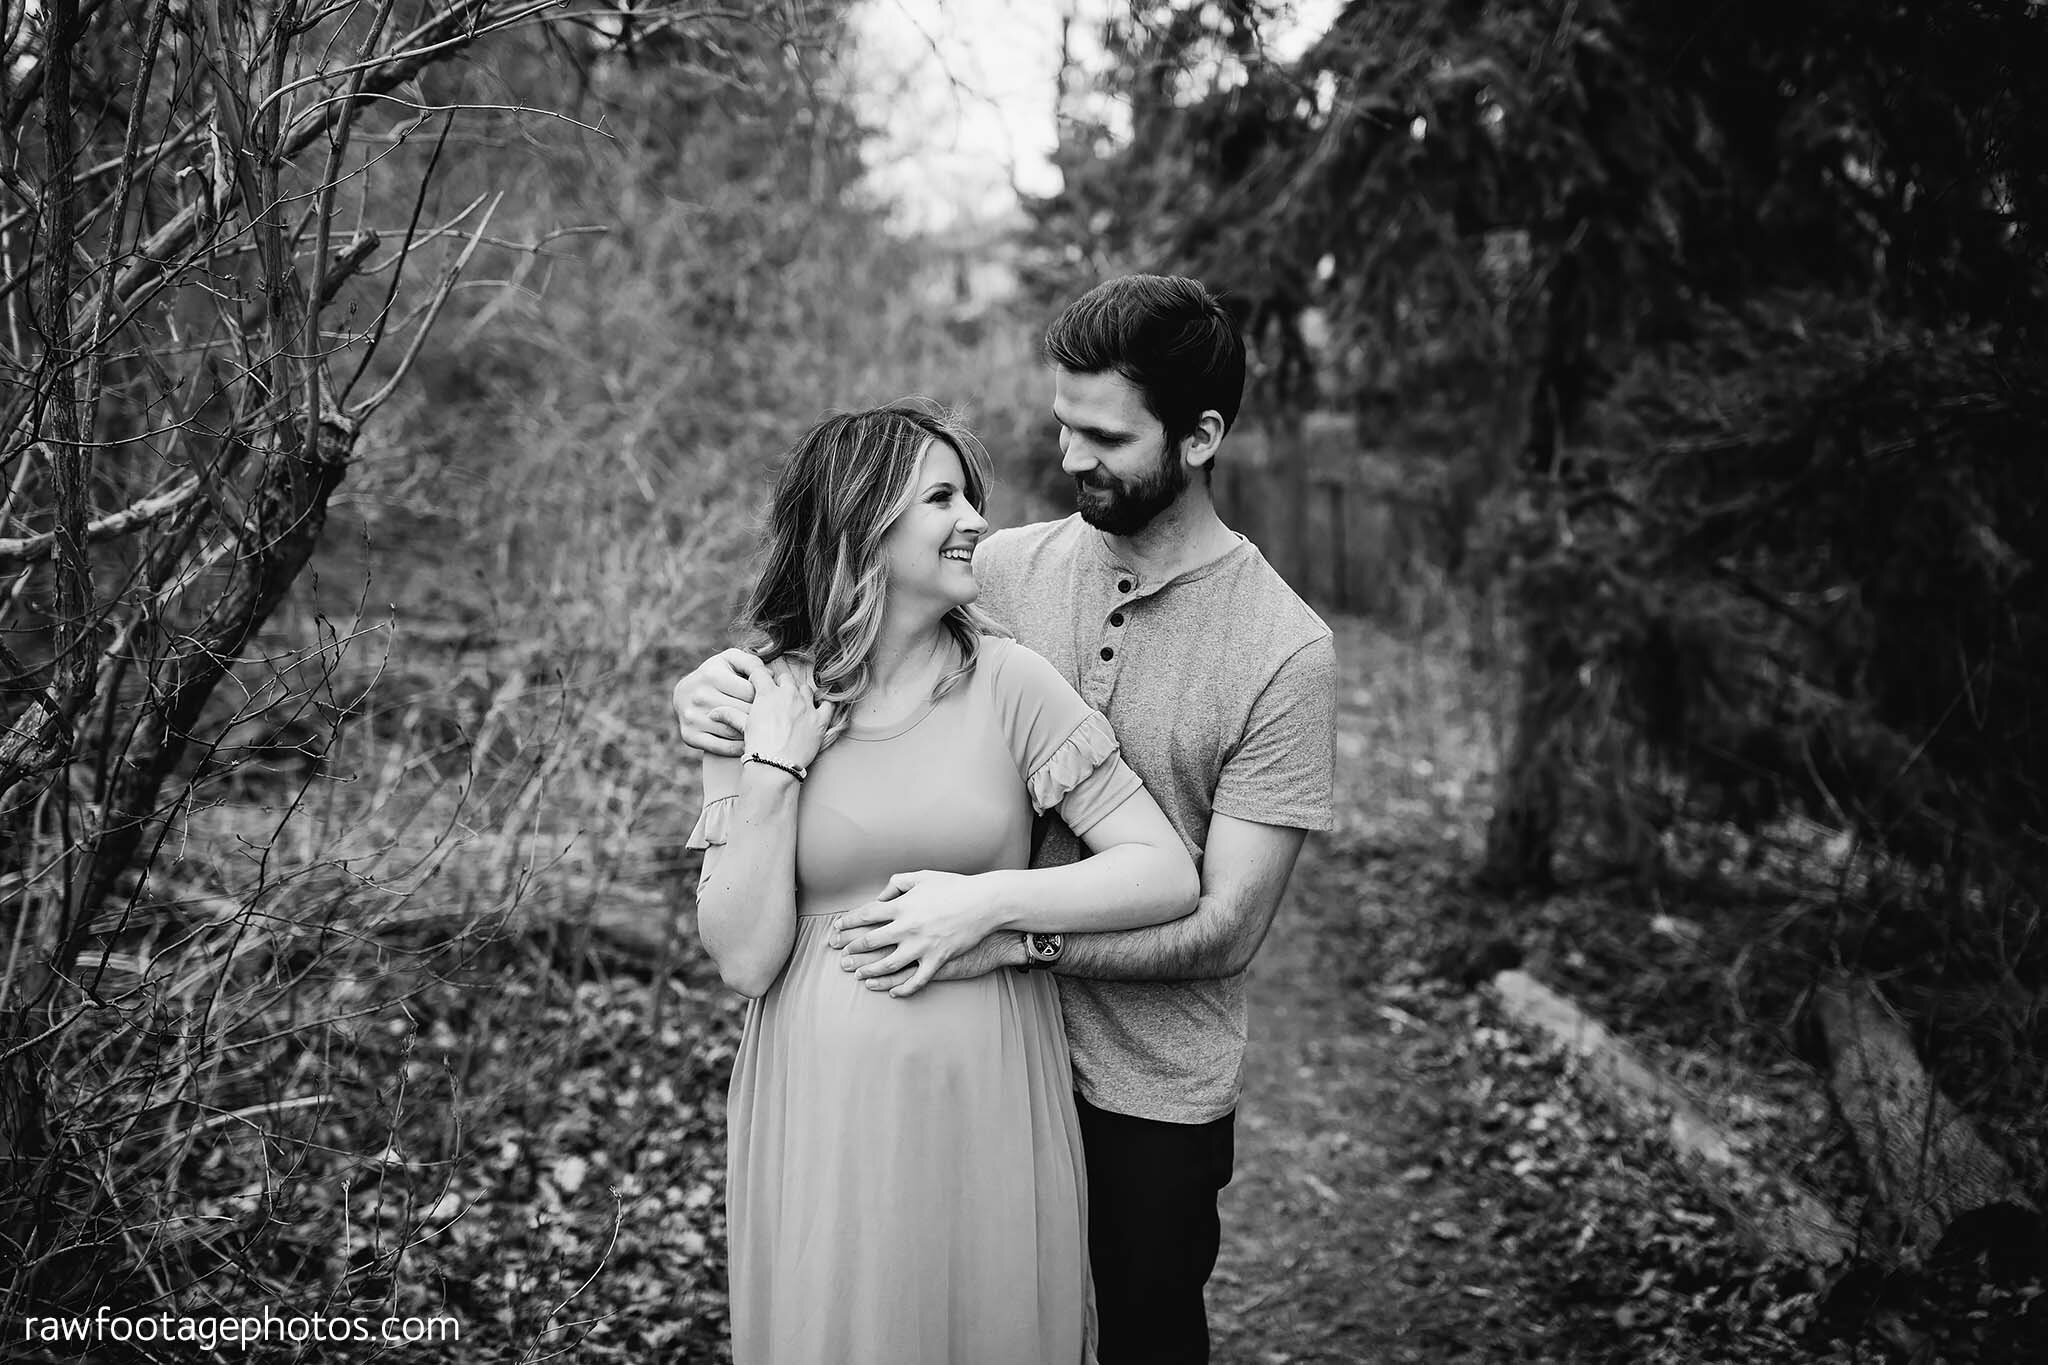 london_ontario_maternity_photographer-raw_footage_photography-in_home_lifestyle_maternity-forest_maternity_session-yellow_maternity_dress_022.jpg